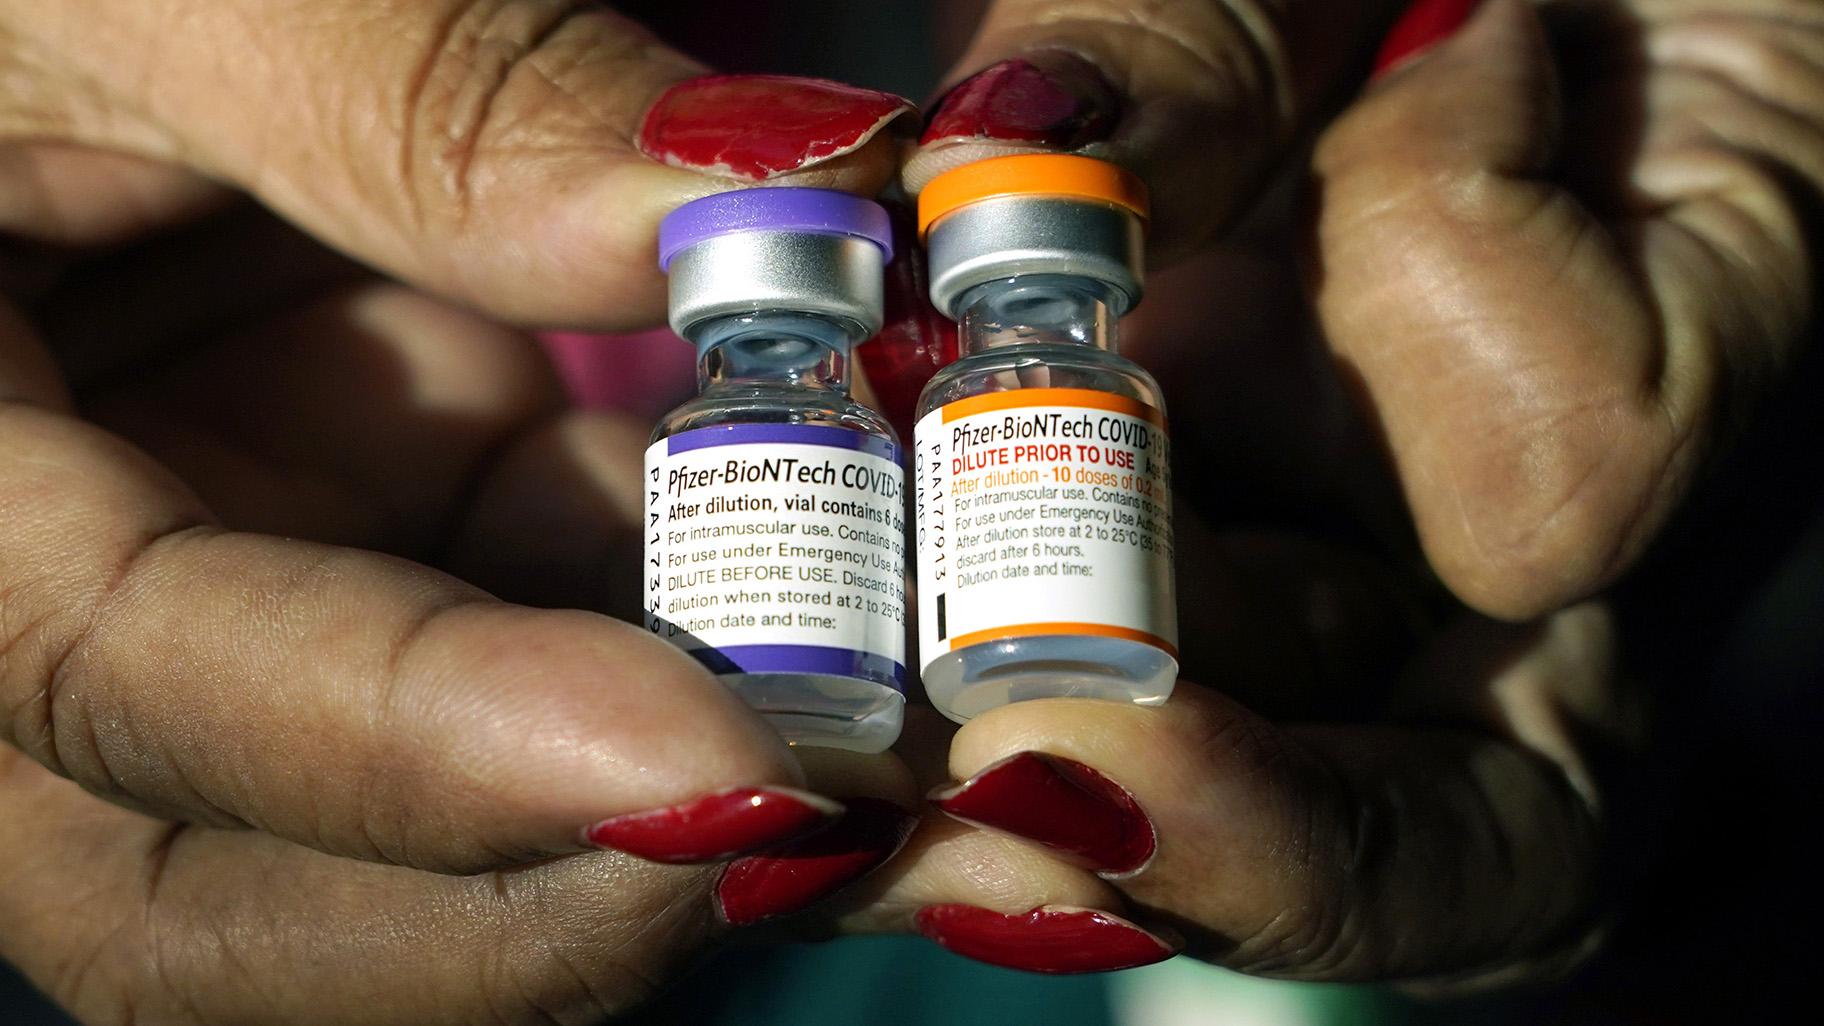 A nurse holds a vial of the Pfizer COVID-19 vaccine for children ages 5 to 11, right, and a vial of the vaccine for adults, which has a different colored label, at a vaccination station in Jackson, Miss., Tuesday, Feb. 8, 2022. (AP Photo / Rogelio V. Solis, File)A nurse holds a vial of the Pfizer COVID-19 vaccine for children ages 5 to 11, right, and a vial of the vaccine for adults, which has a different colored label, at a vaccination station in Jackson, Miss., Tuesday, Feb. 8, 2022. (AP Photo / Rogelio V